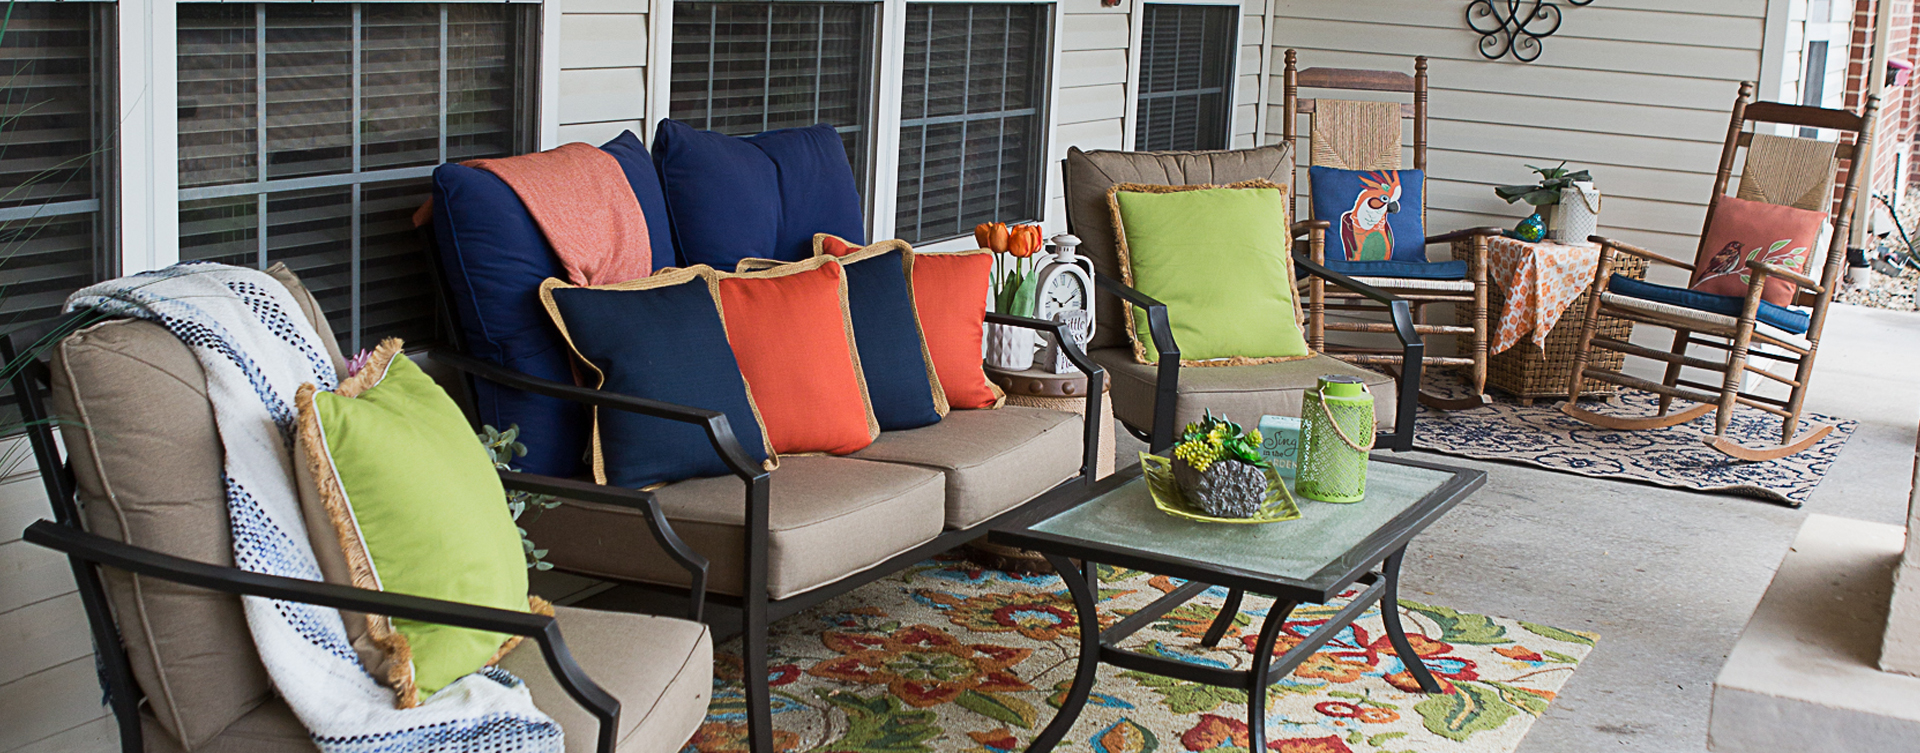 Relax in your favorite chair on the porch at Bickford of Iowa City